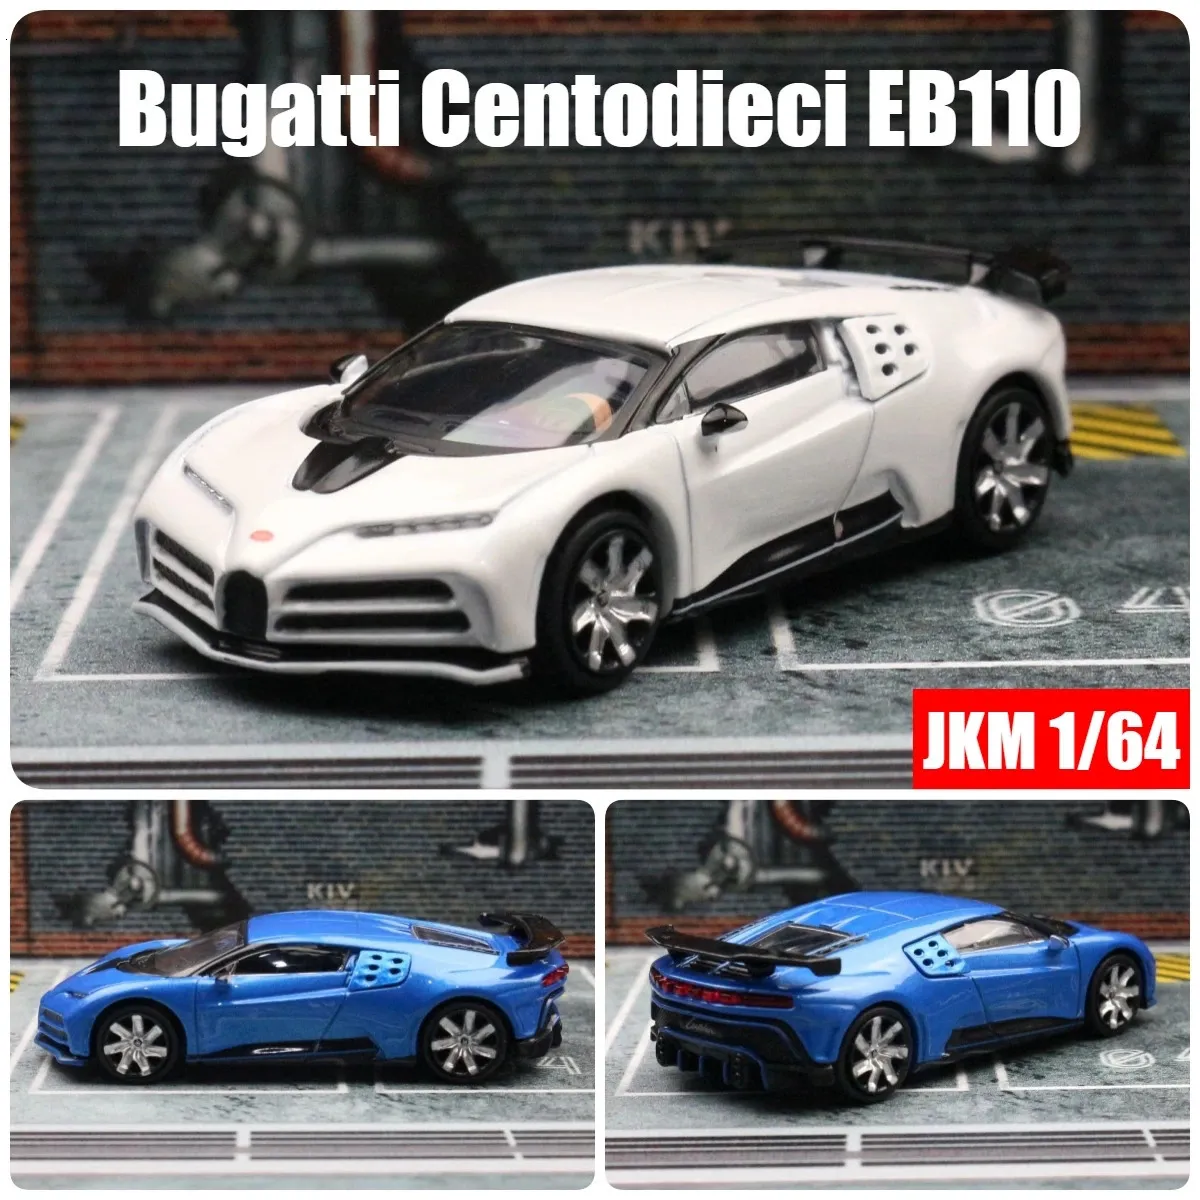 1 64 Bugatti Centodieci EB110 Miniature Toy Car 1/64 JKM Racing Vehicle Model Free Wheels Diecast Alloy Metal Collection Gift 240402